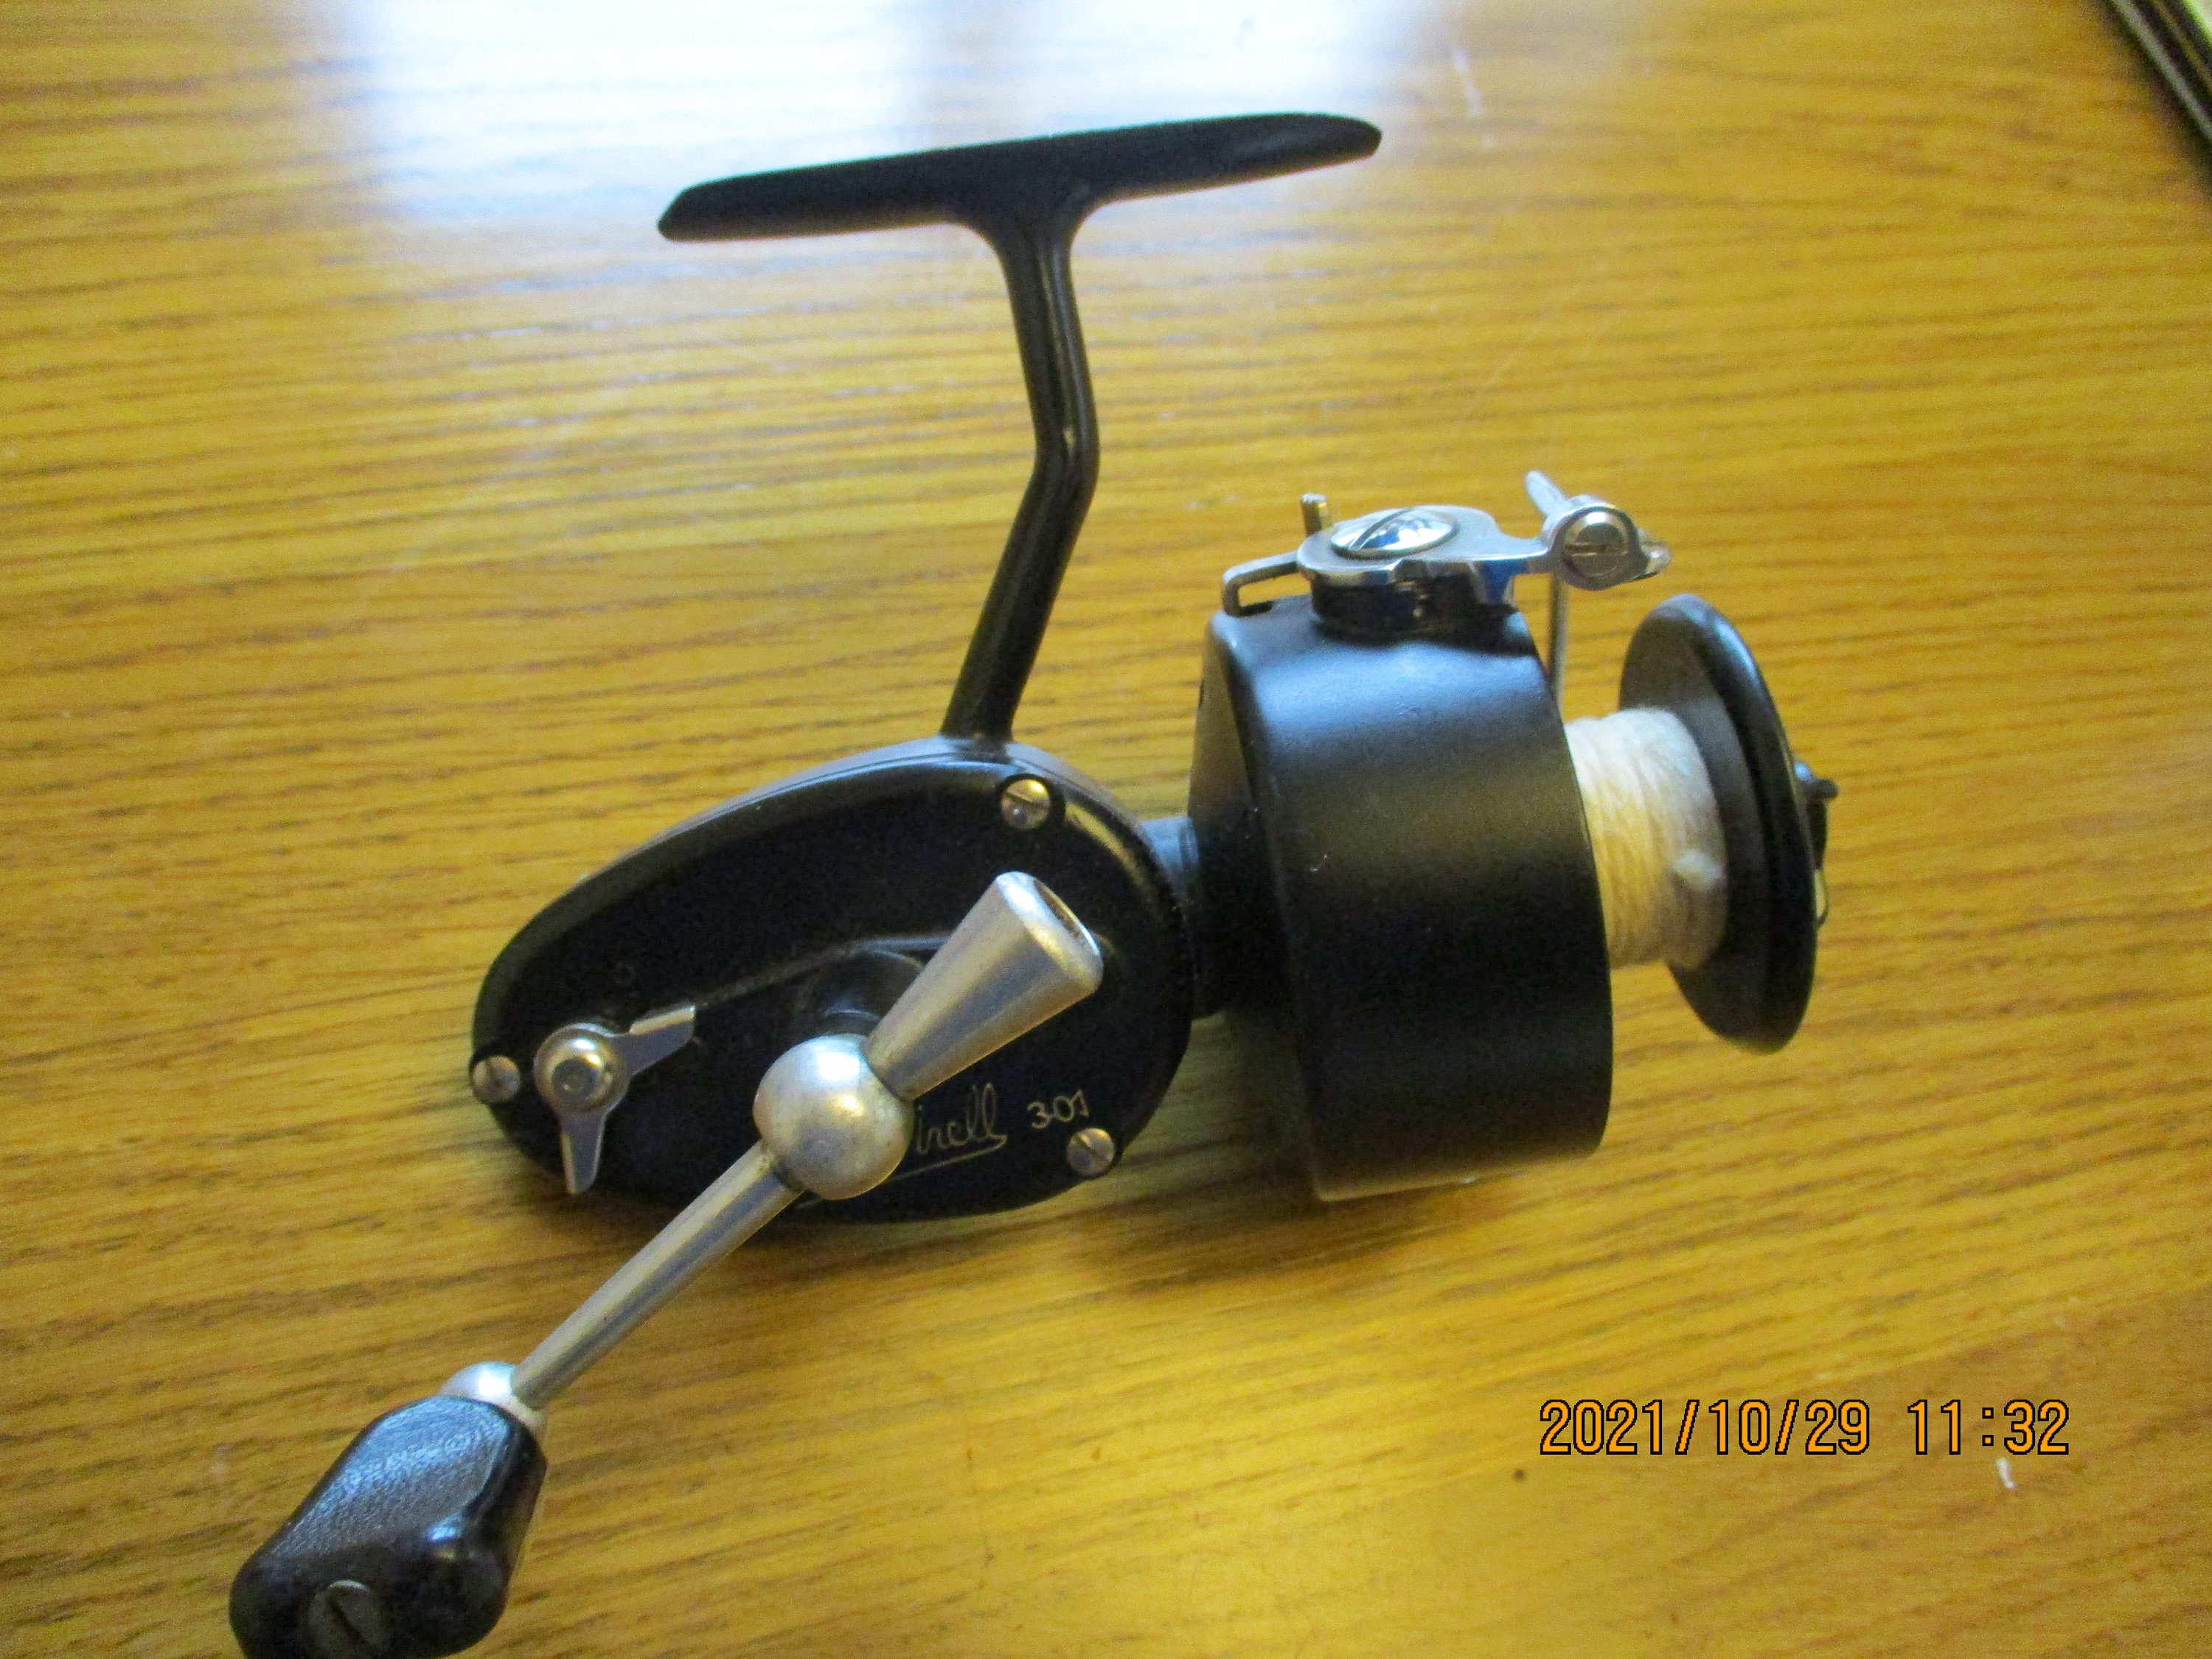 A Very Good Vintage Mitchell 301 Spinning Reel 